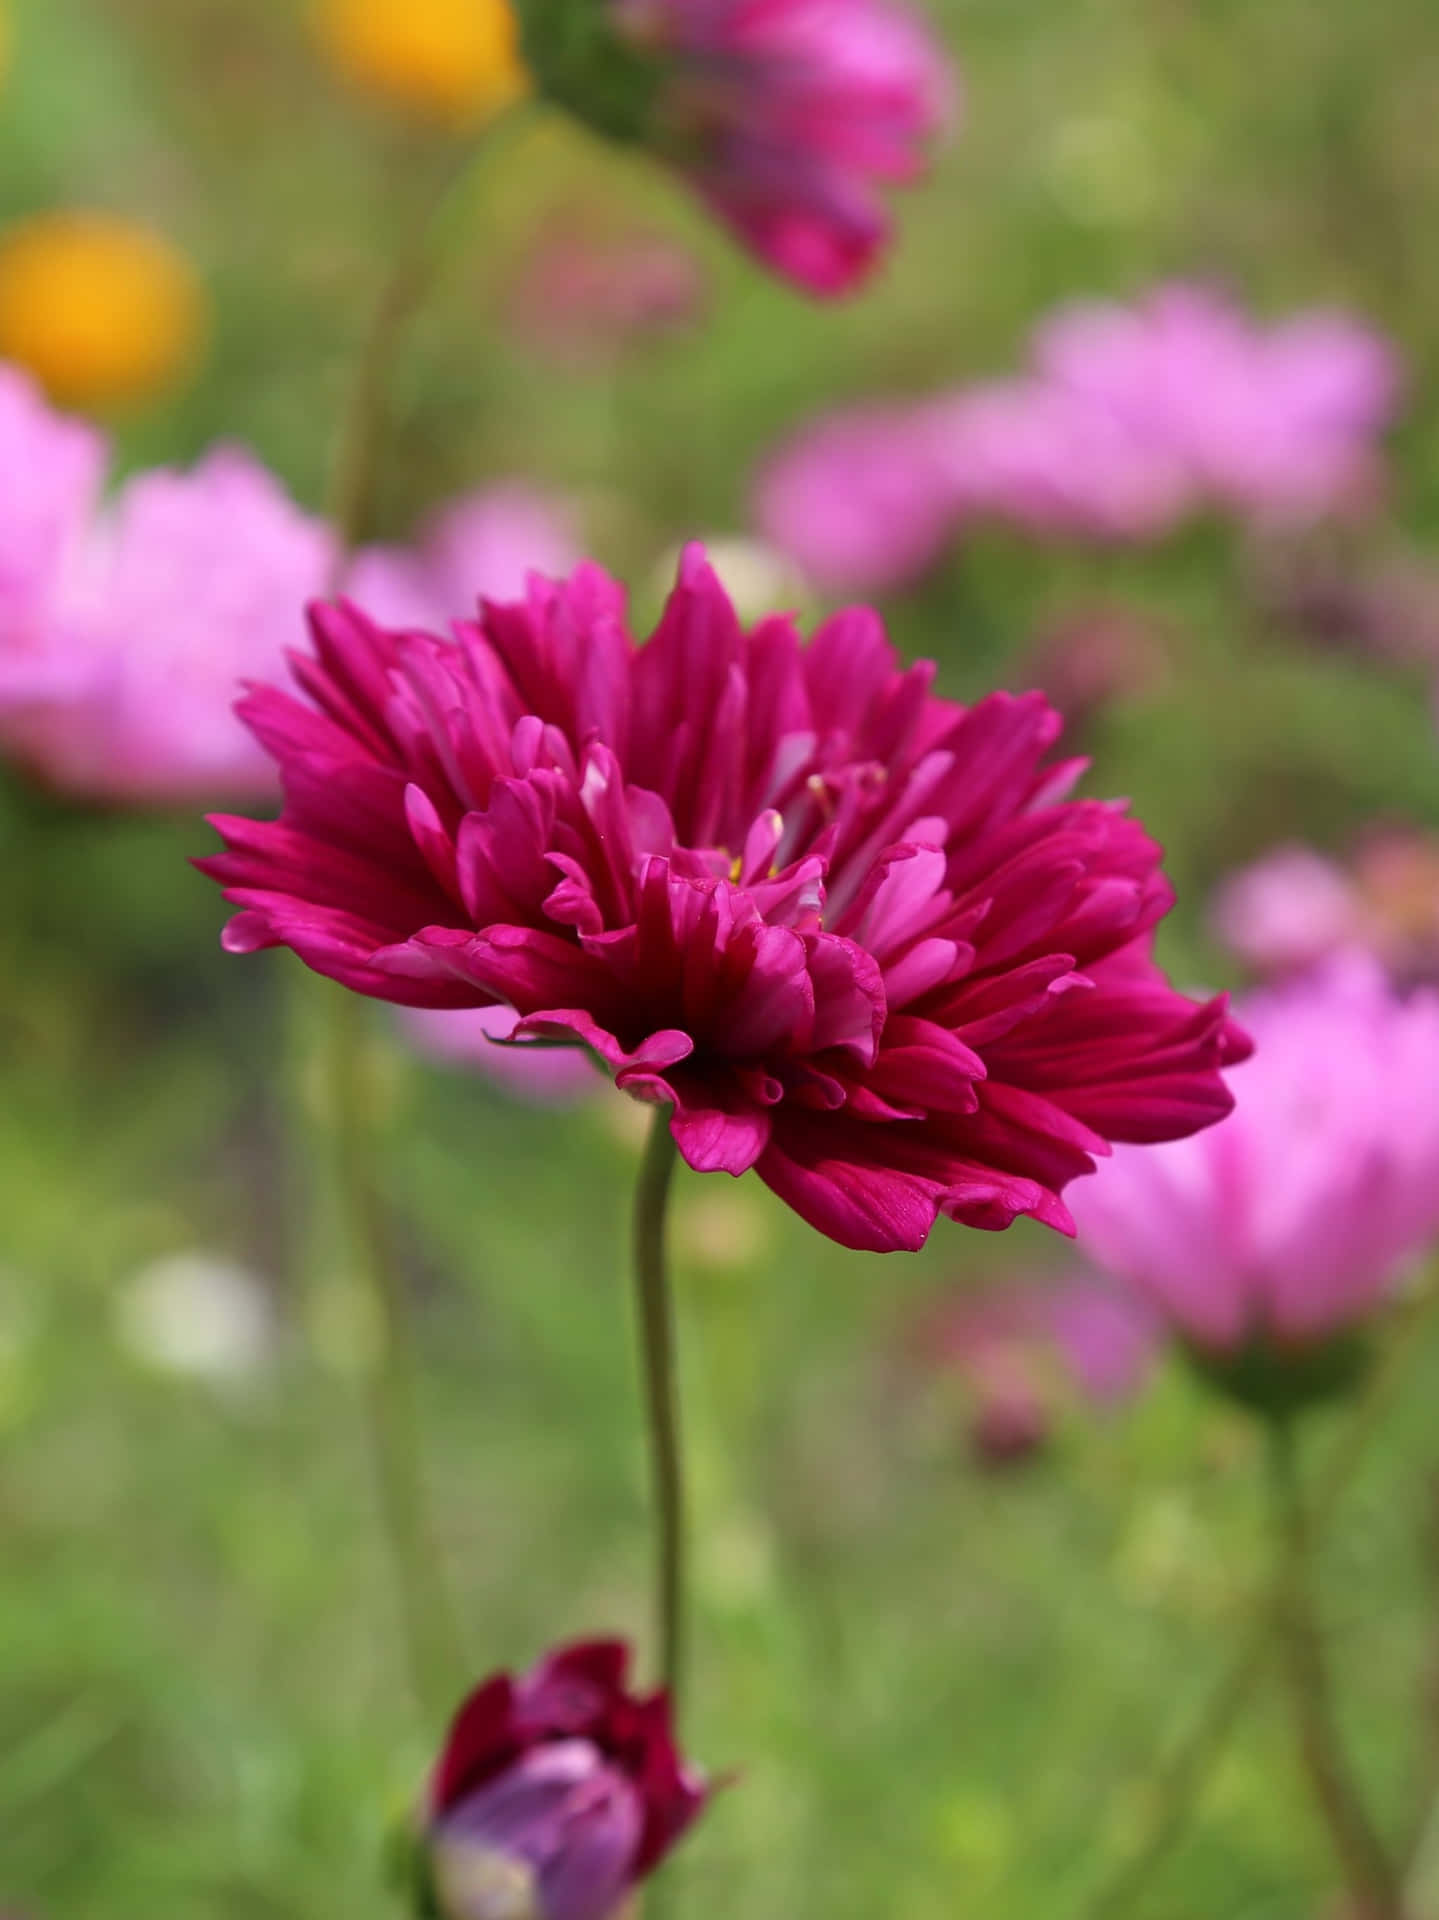 A vibrant pink flower blooming in the spring